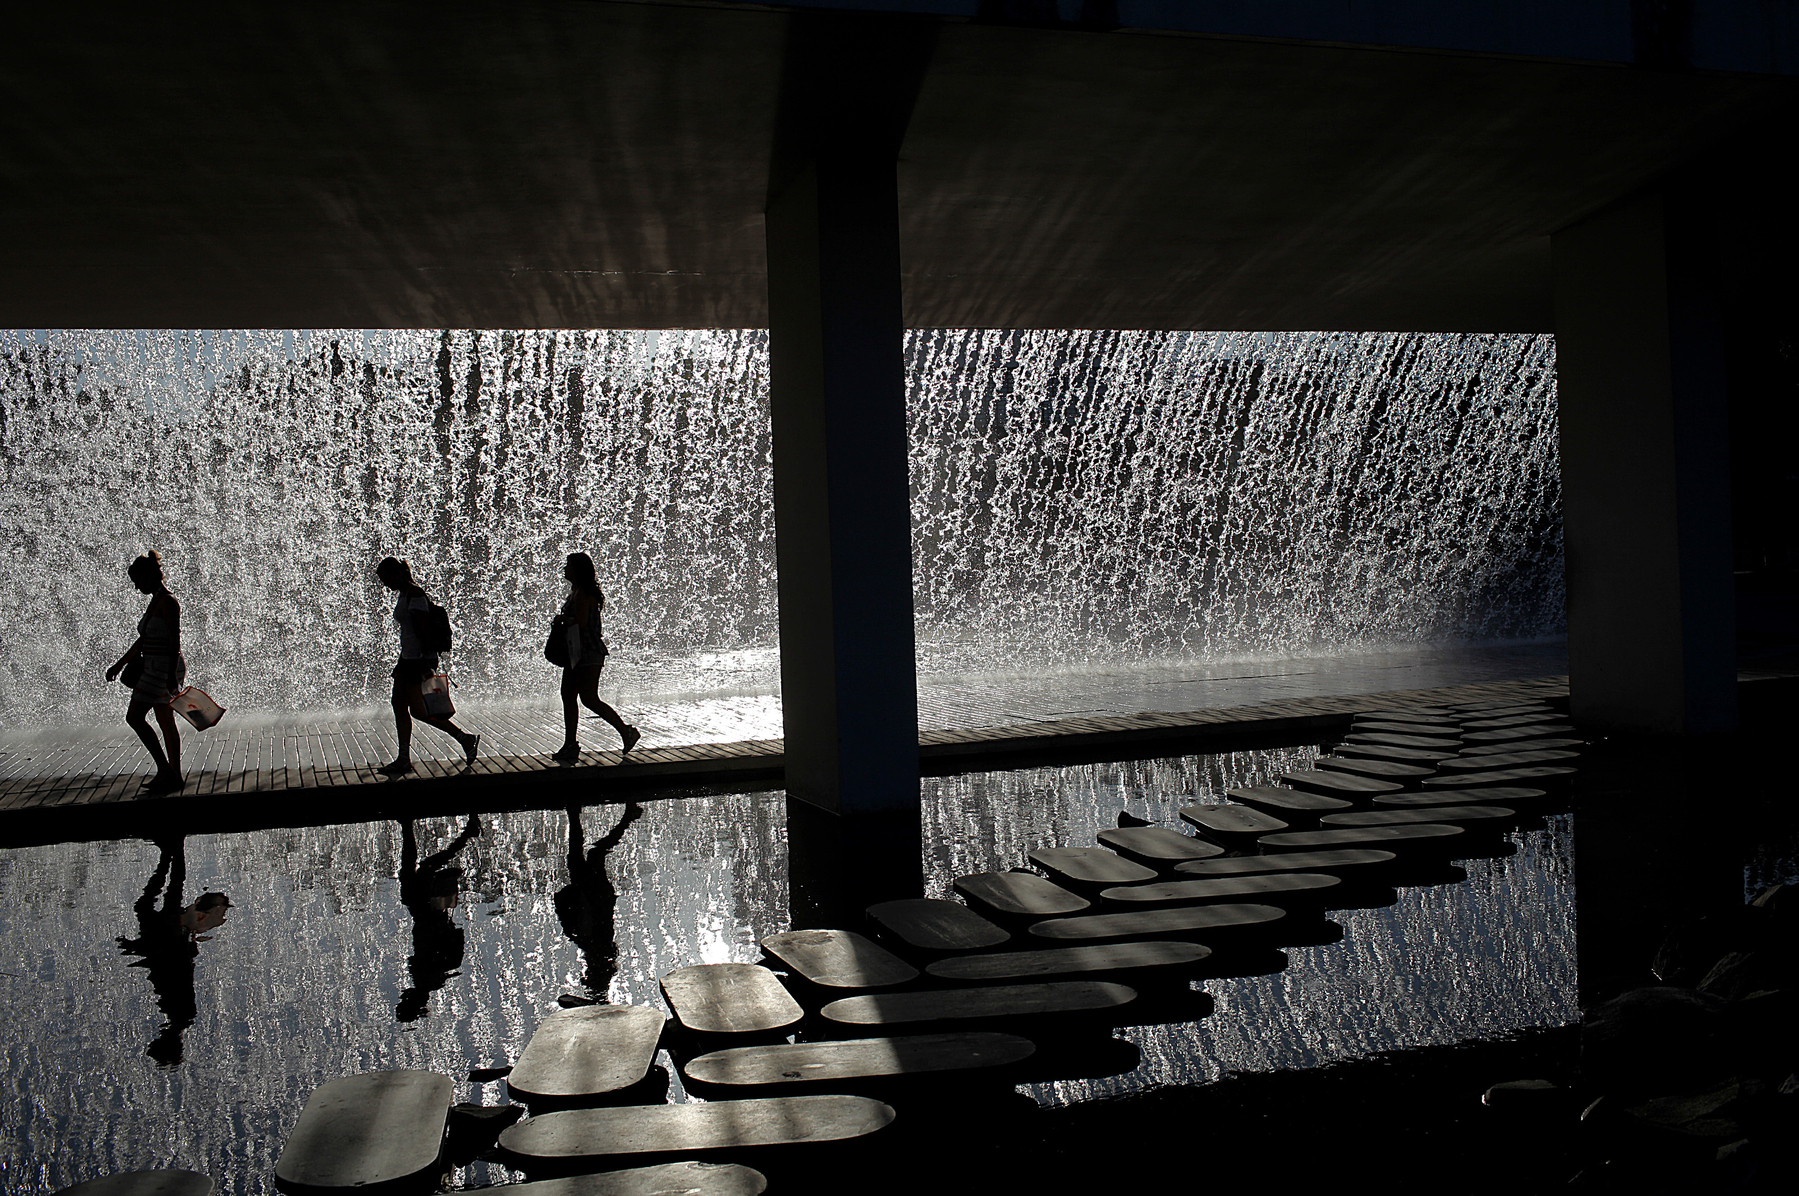 Three people walking on a path under a man-made waterfall.